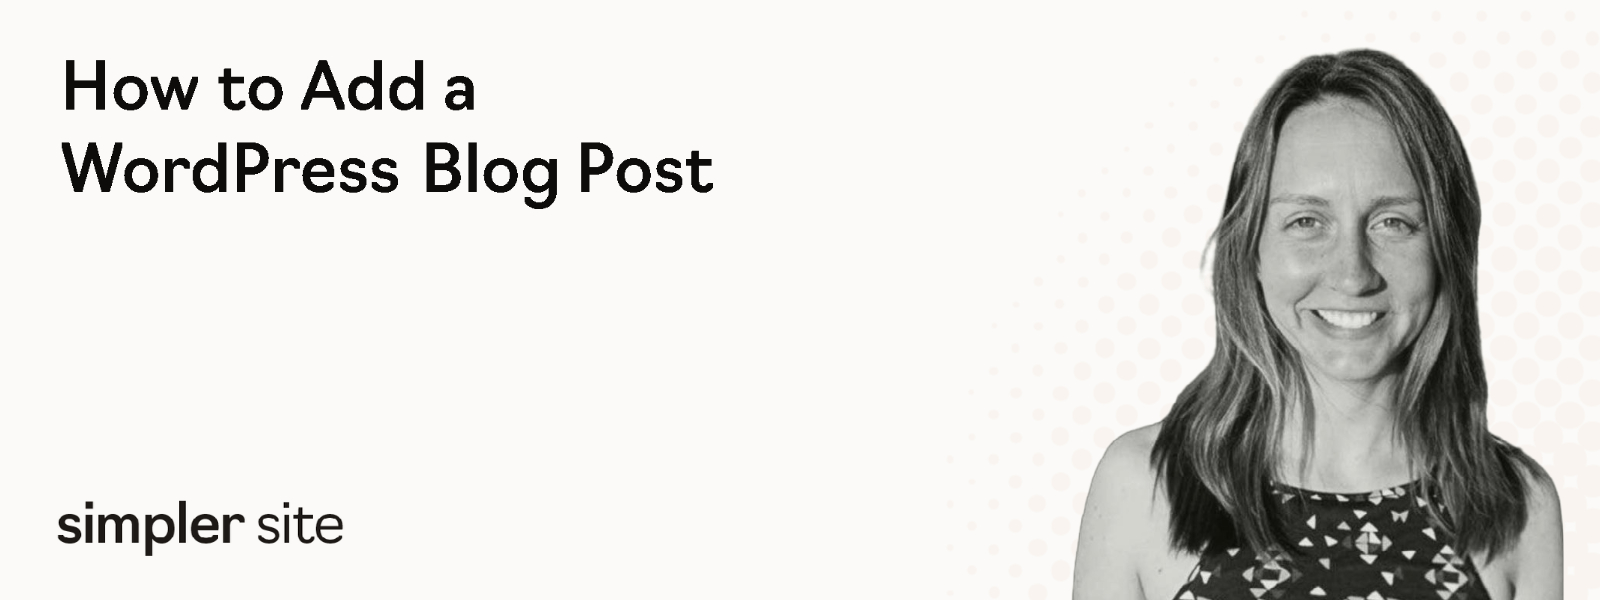 How to Add a WordPress Blog Post